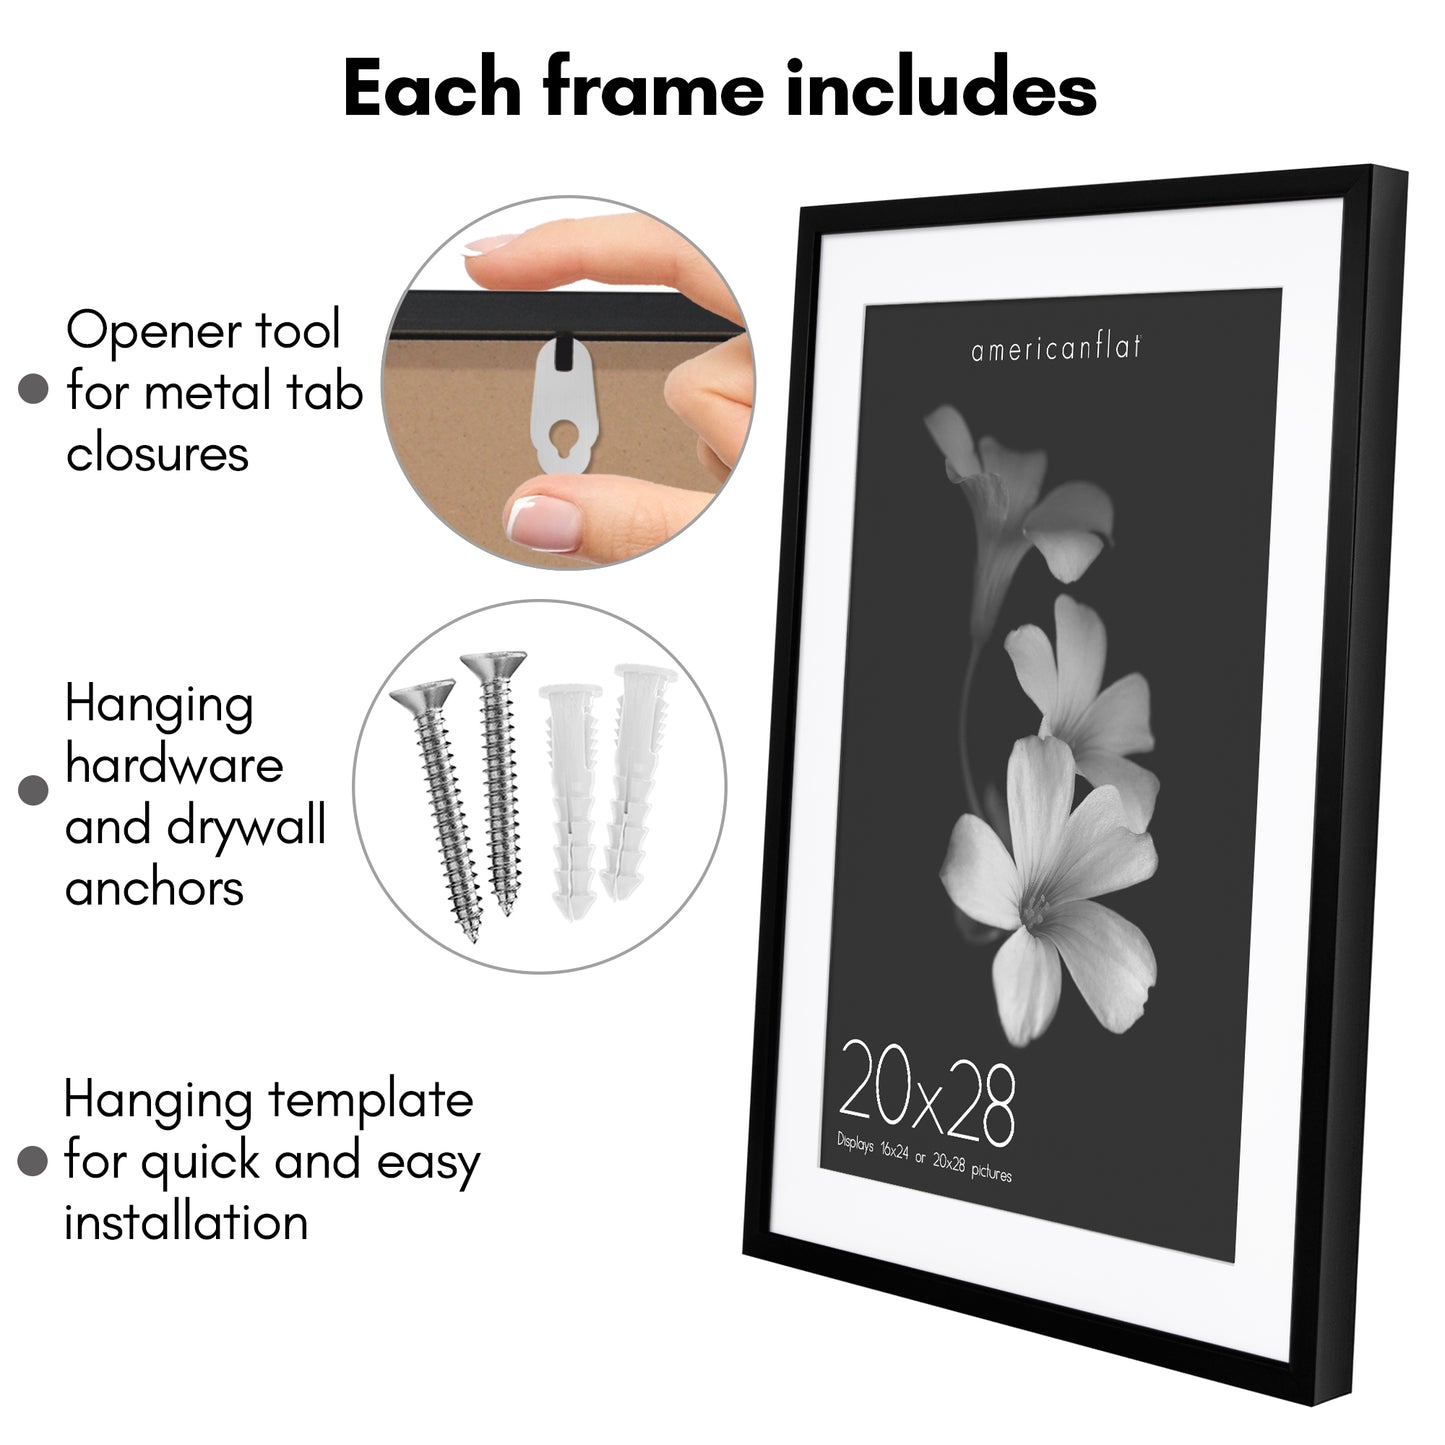 Deep Molding Picture Frame with Mat | Choose Size and Color